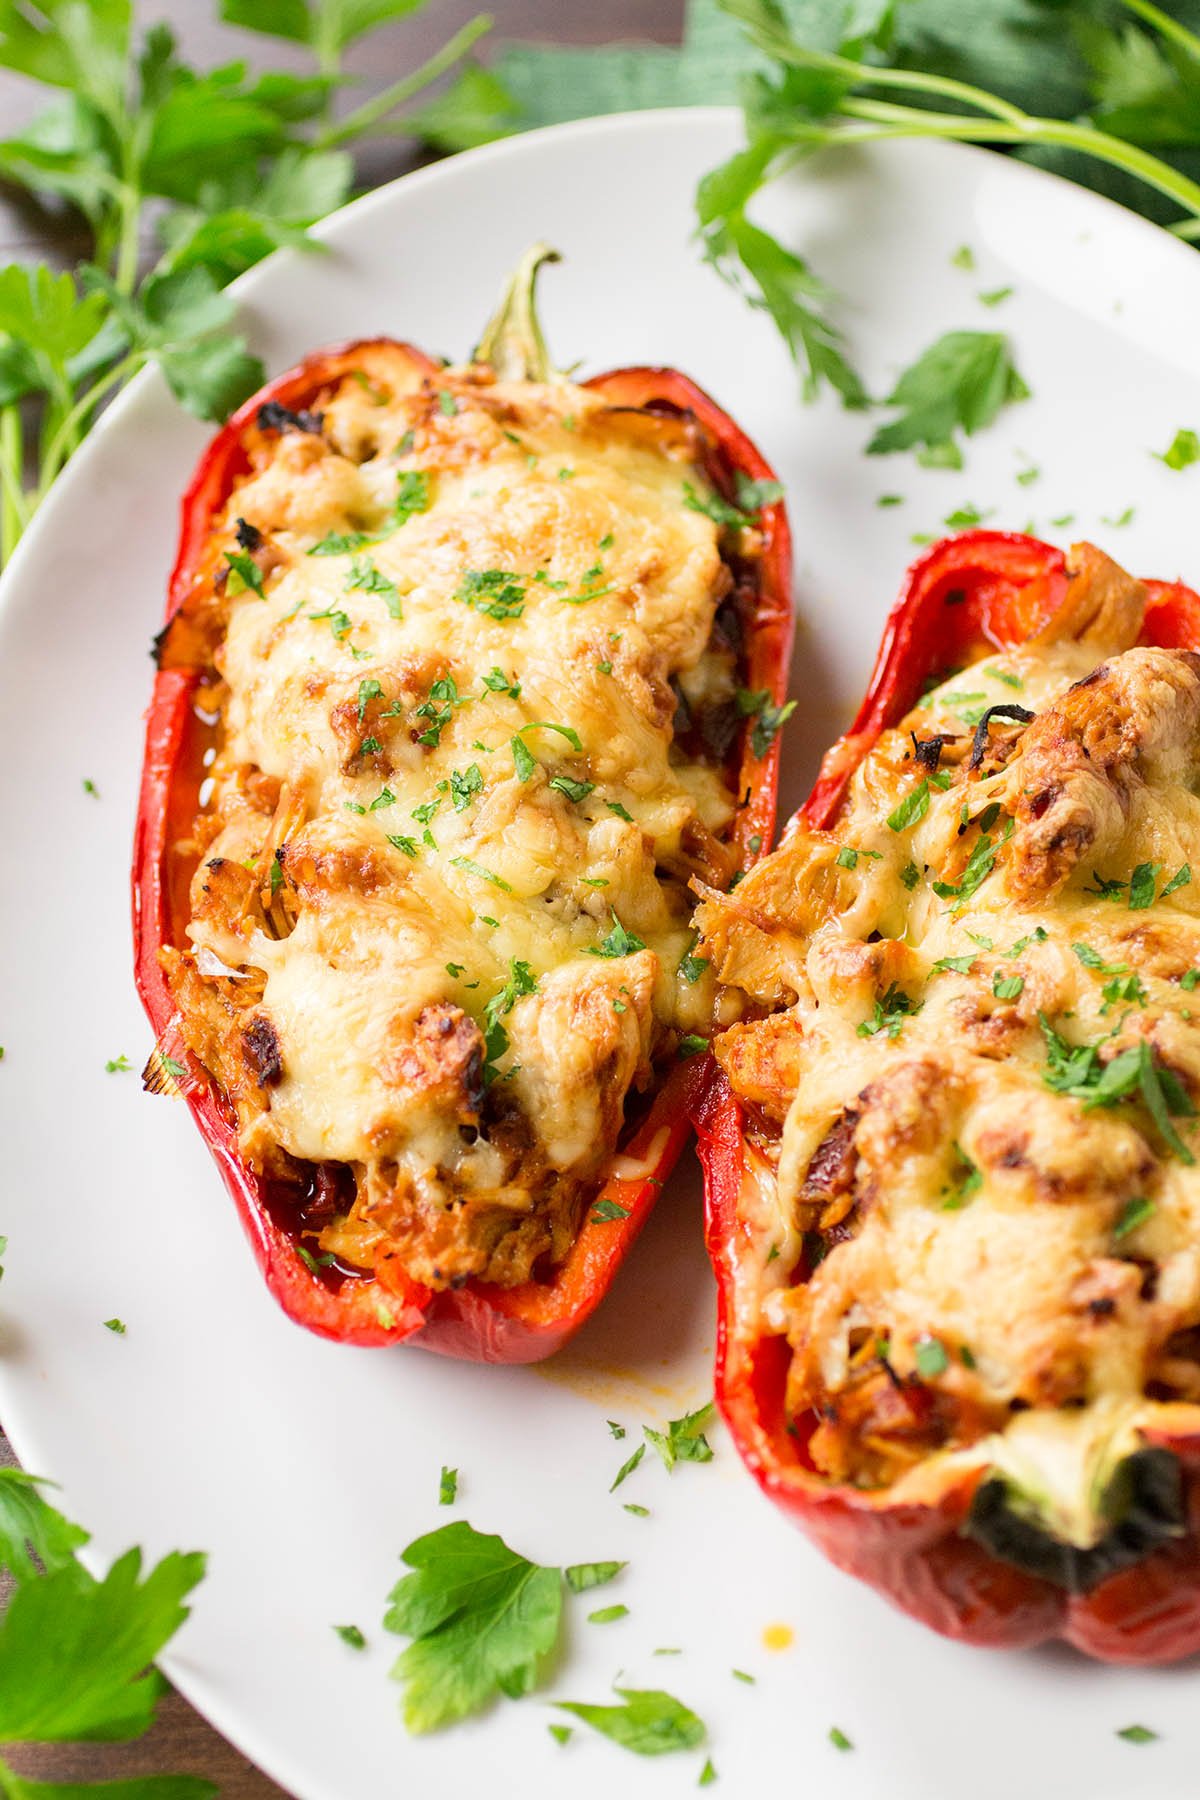 Chipotle Chicken Stuffed Peppers looking yum